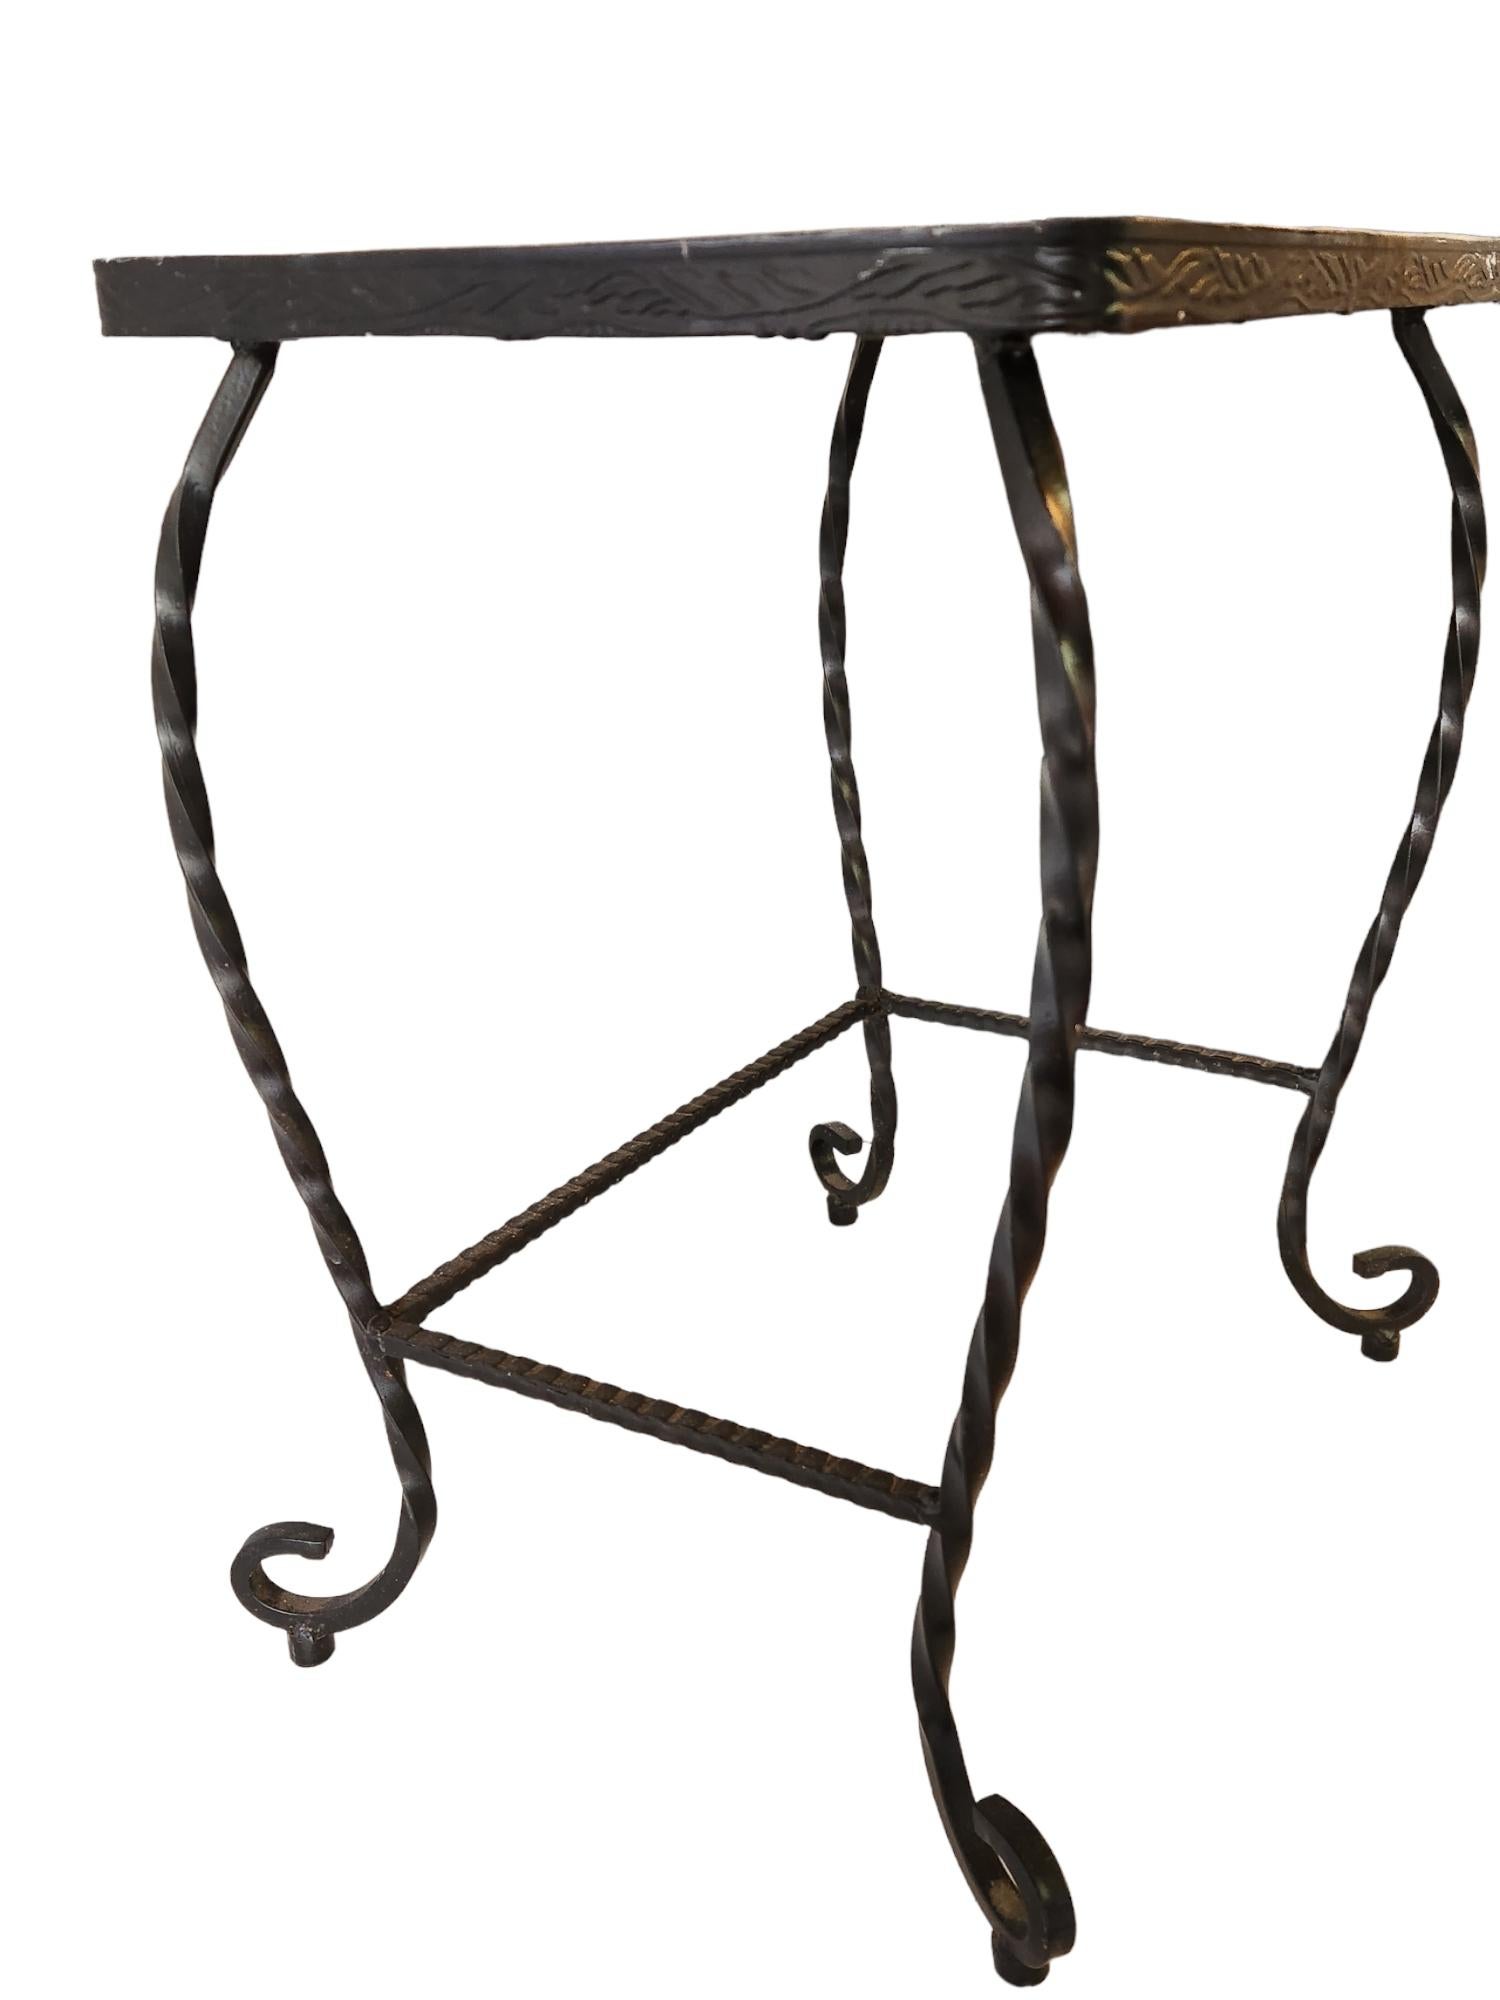 Pair of Twisted Wrought Iron Ceramic Mosaic Side Tables, Italy, 1960 For Sale 7